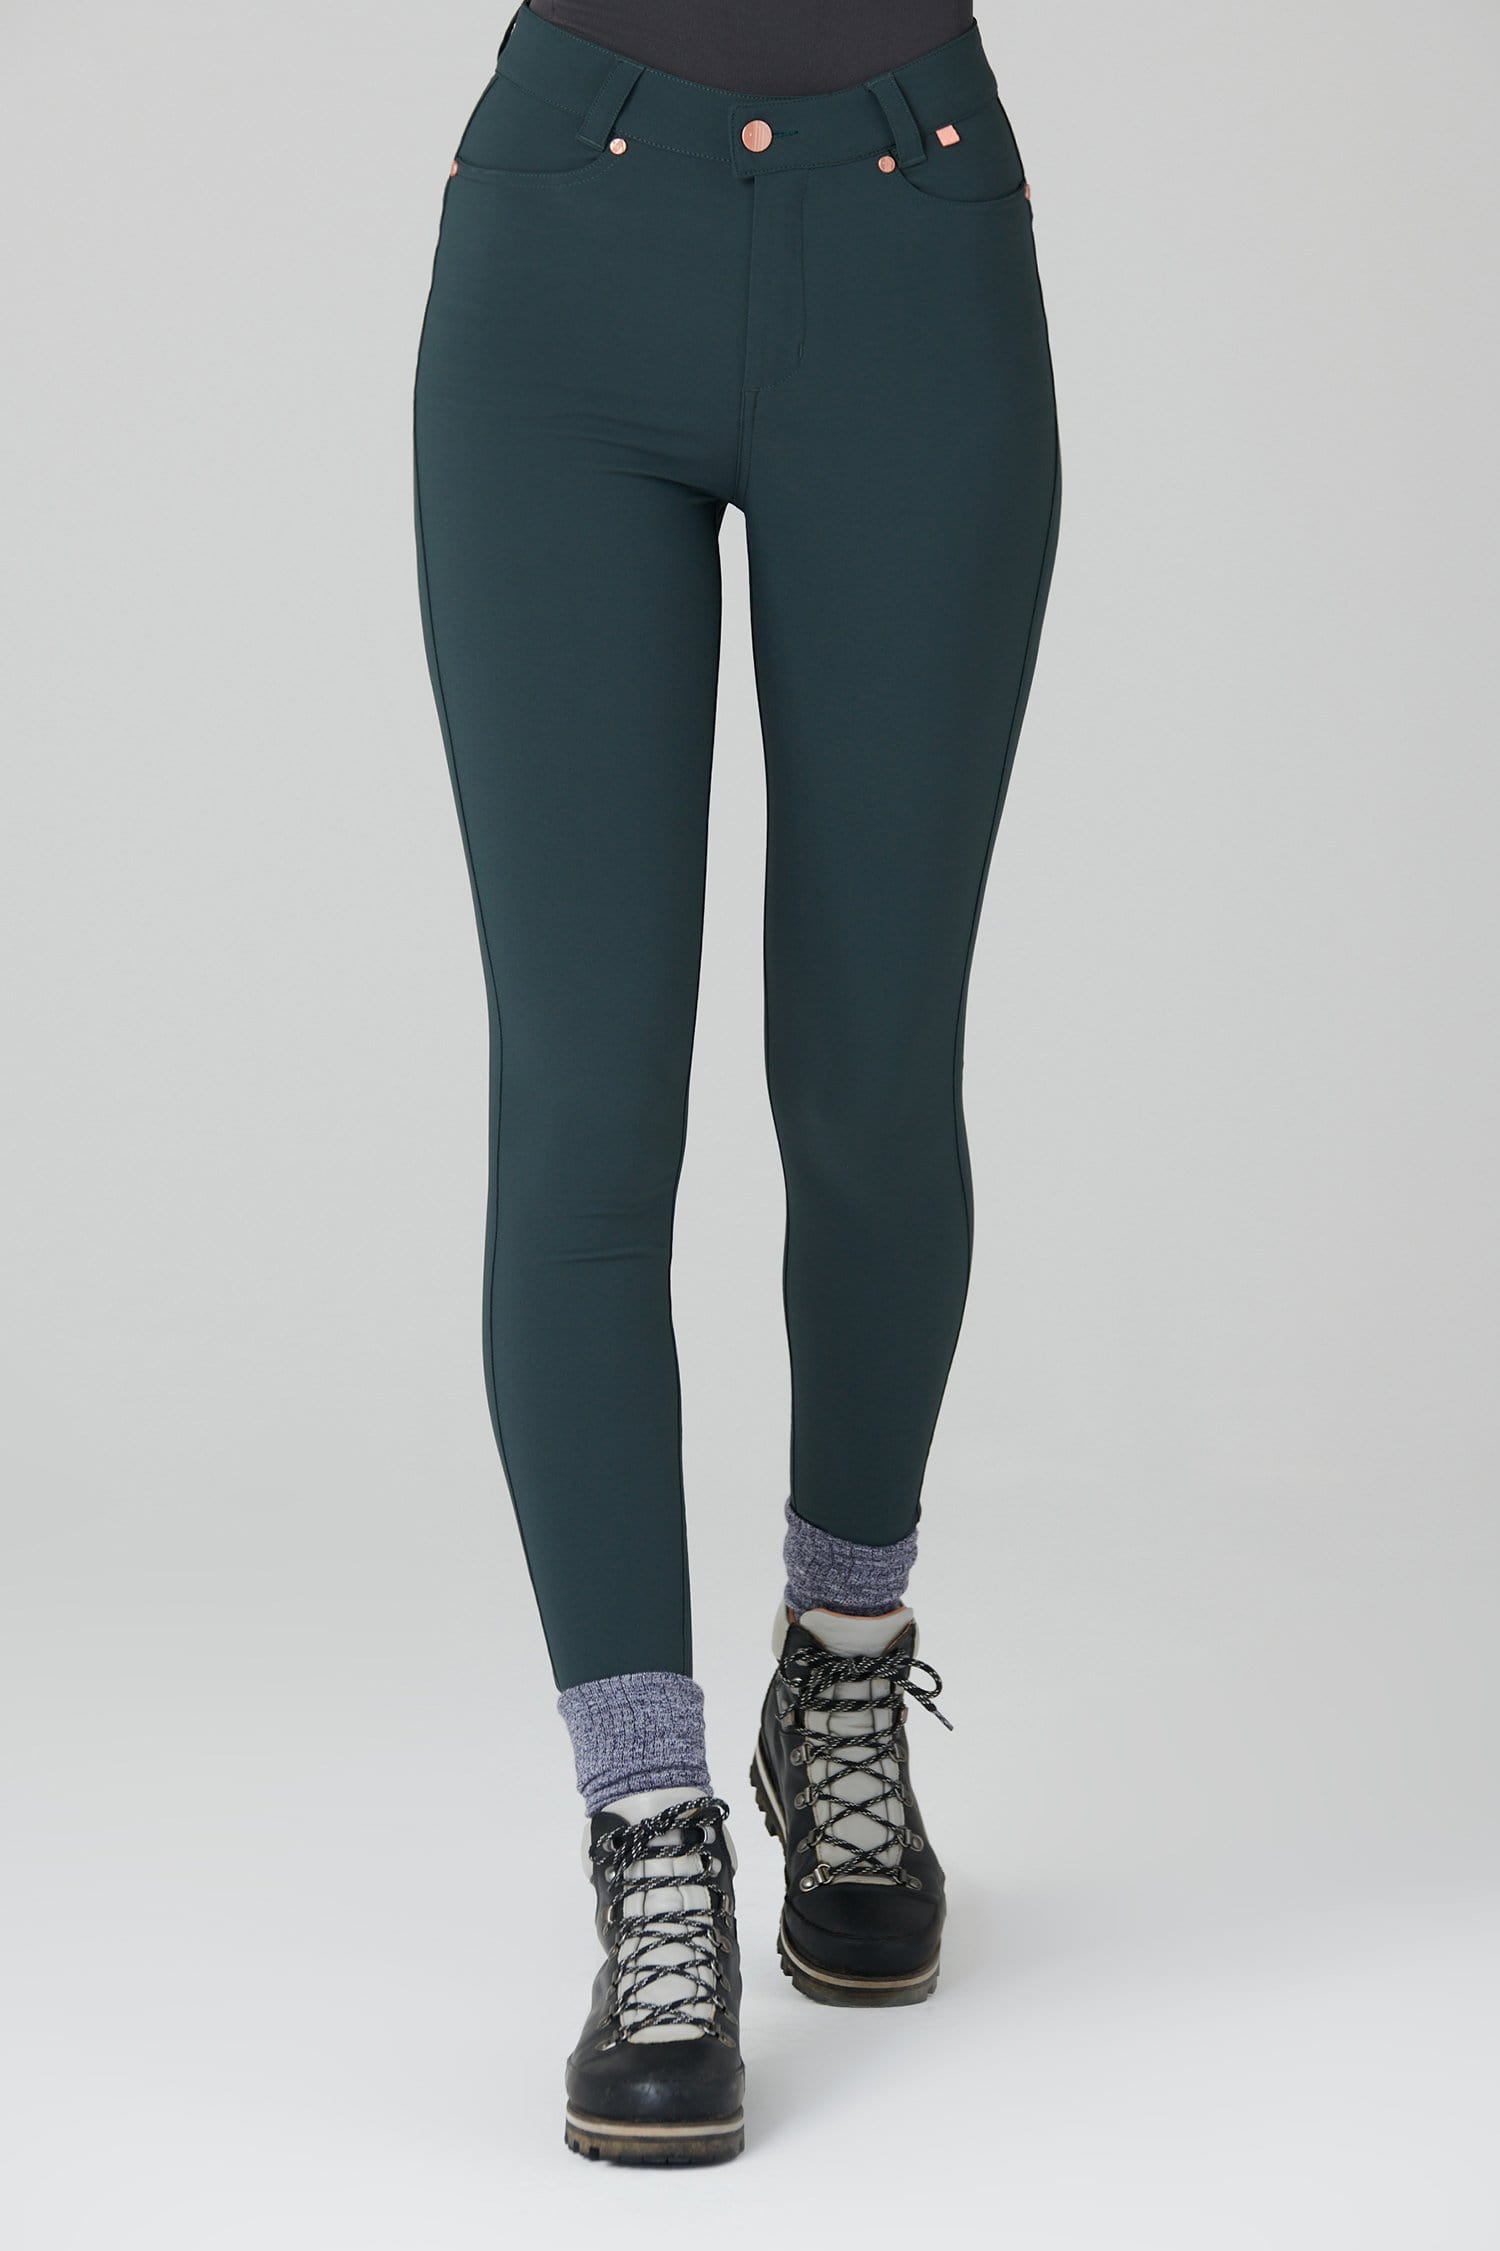 Thermal Skinny Outdoor Trousers - Forest Green - 26l / Uk8 - Womens - Acai Outdoorwear